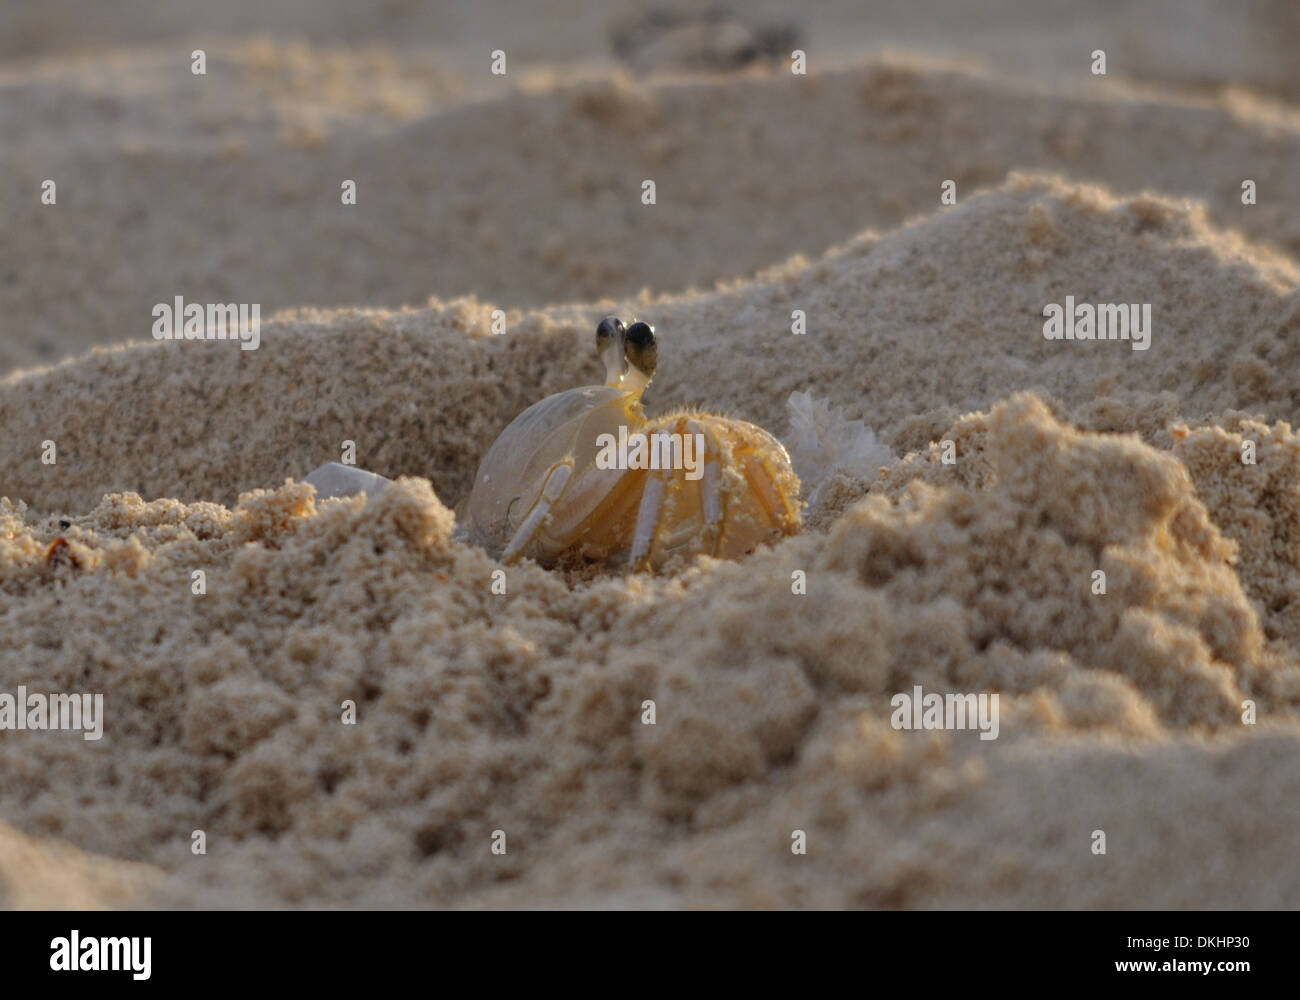 Sand crab emerging from its bolt hole in the sand, Mexico Stock Photo